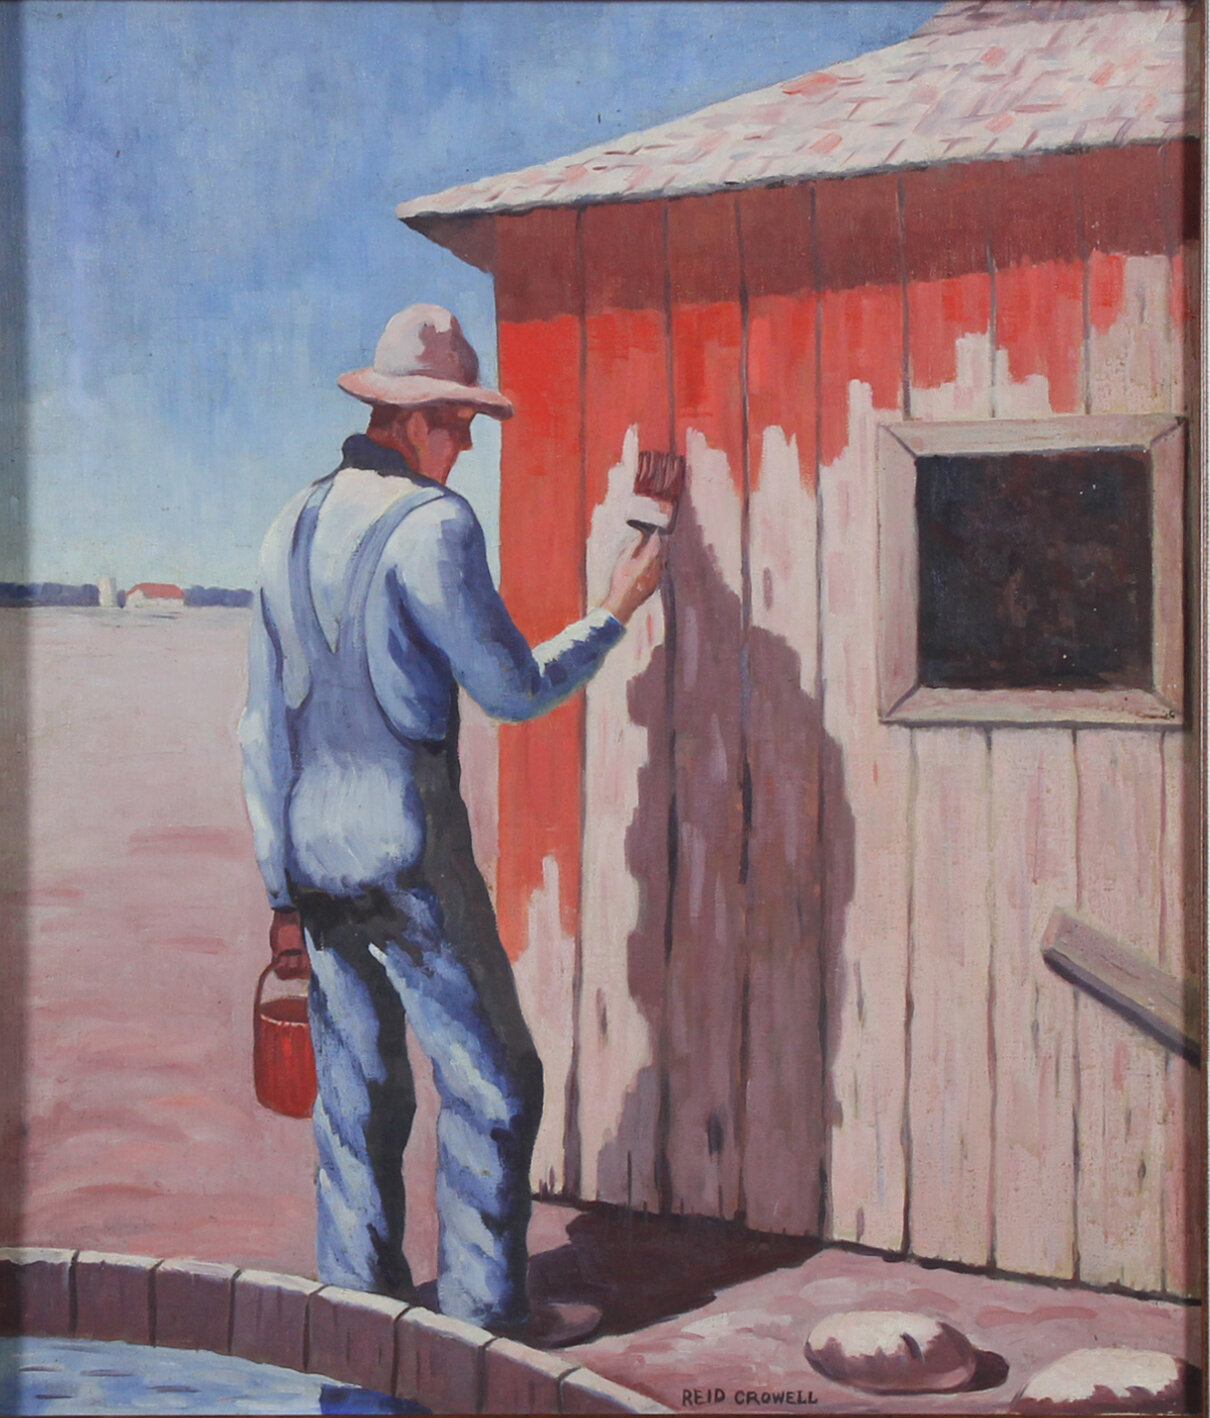 Reid Crowell, No title, c. 1938, oil on canvas Museum Exchange and Purchase